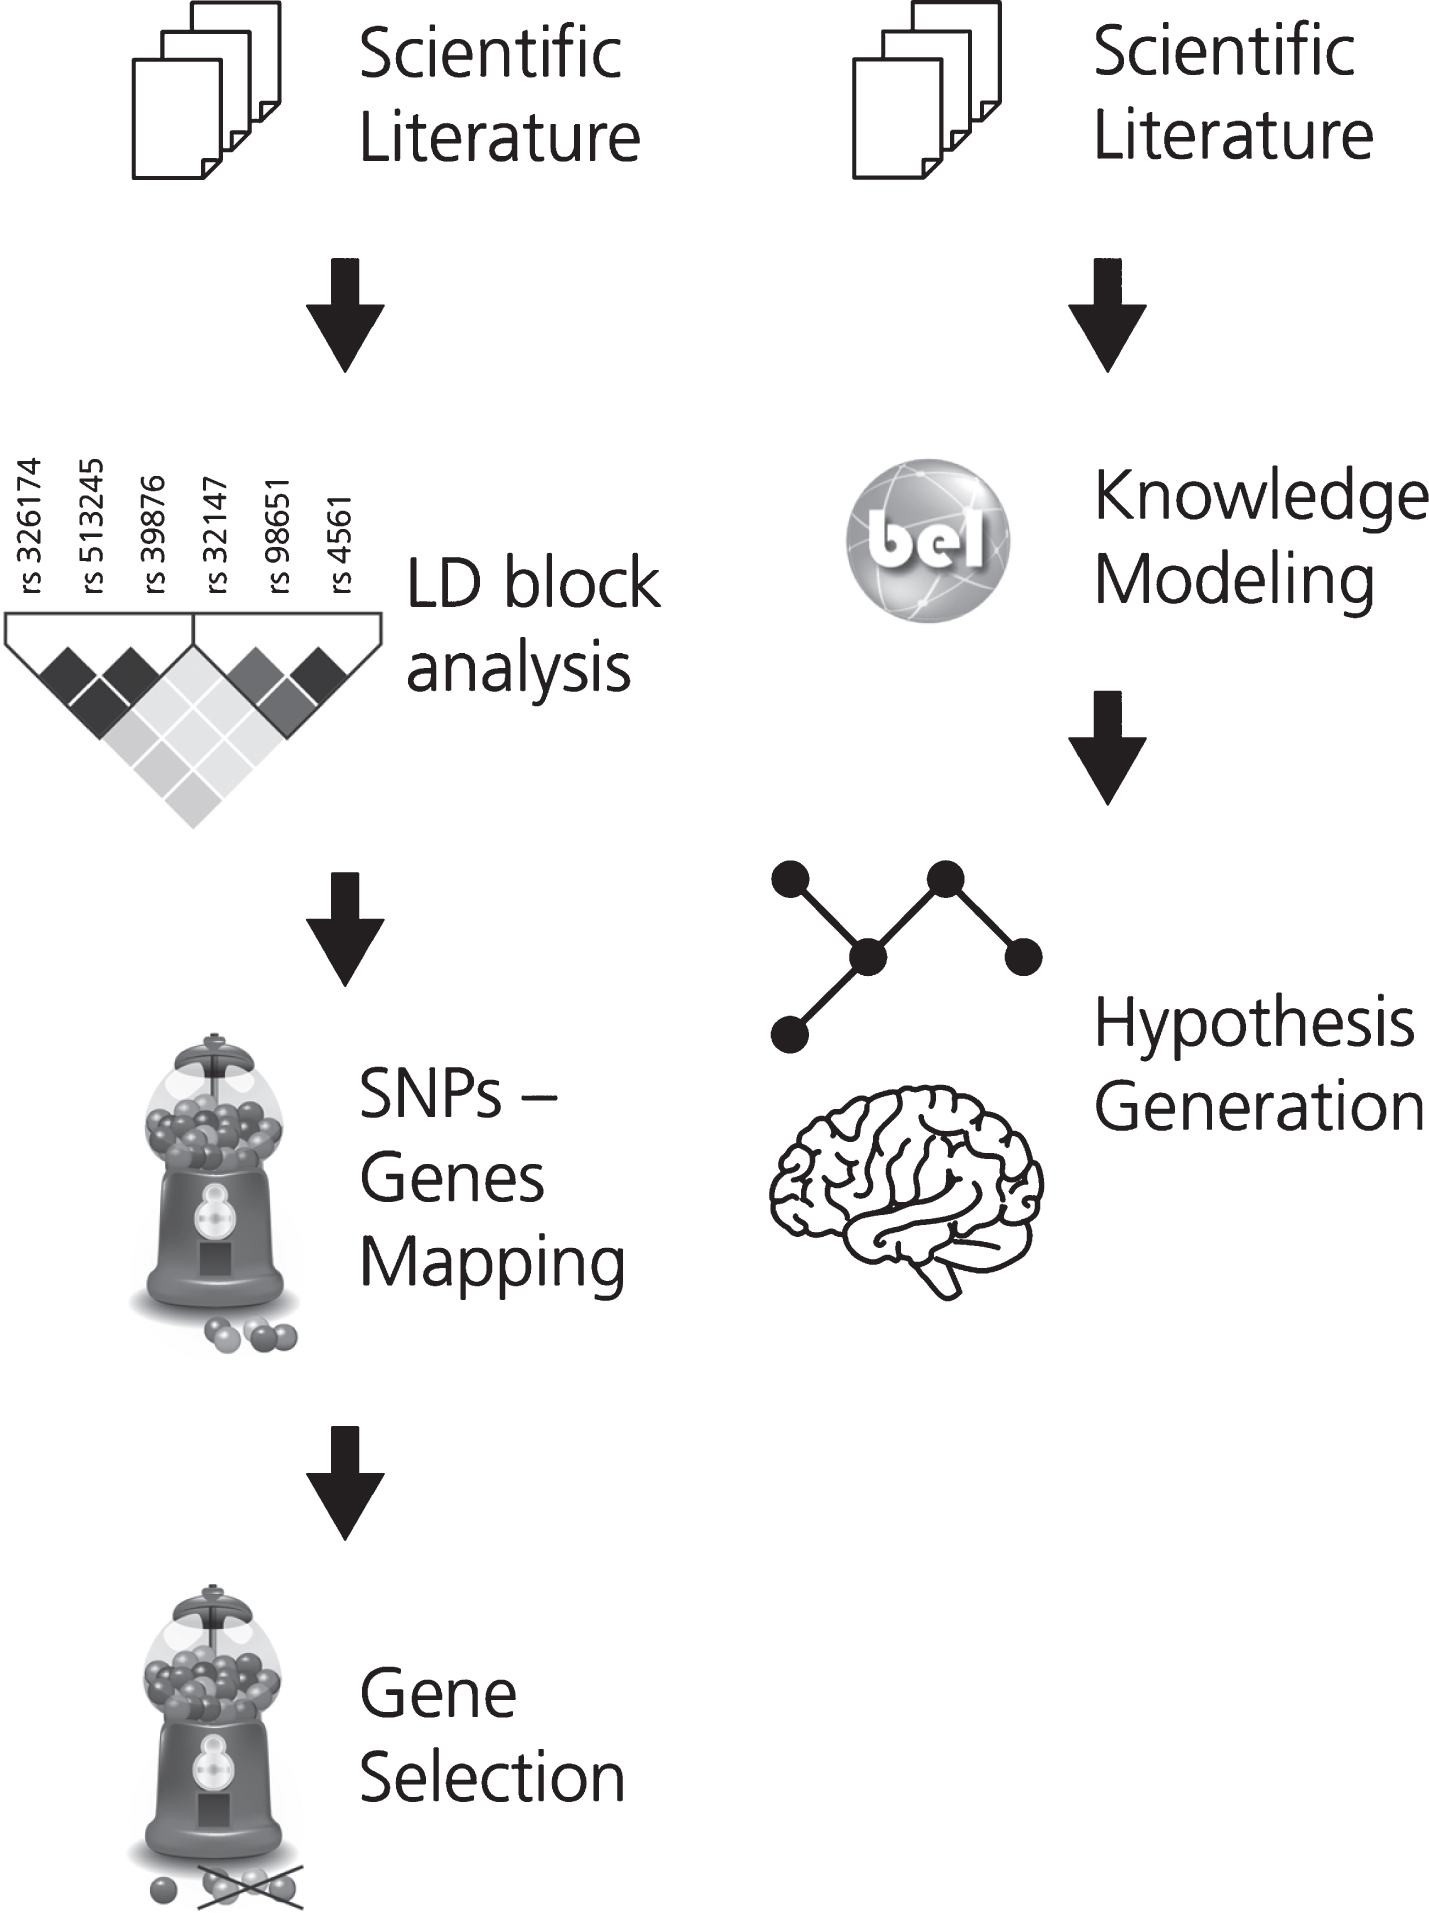 The two workflows developed for (A) gene prioritization and for (B) generating the mechanistic knowledge assembly around the effect of genetic variants on neuroimaging features in AD. In workflow A, the first step involves the selection of a corpus of relevant scientific literature. Next, the SNPs extracted from this corpus were subjected to LD block analysis and the subsequently obtained SNPs were mapped to their corresponding or associated genes. KANSL1, a novel AD gene, was selected from this pool of mapped genes for further investigation. In workflow B, corpus for the selected gene is extracted and translated into BEL to generate a knowledge assembly model for hypothesis generation.